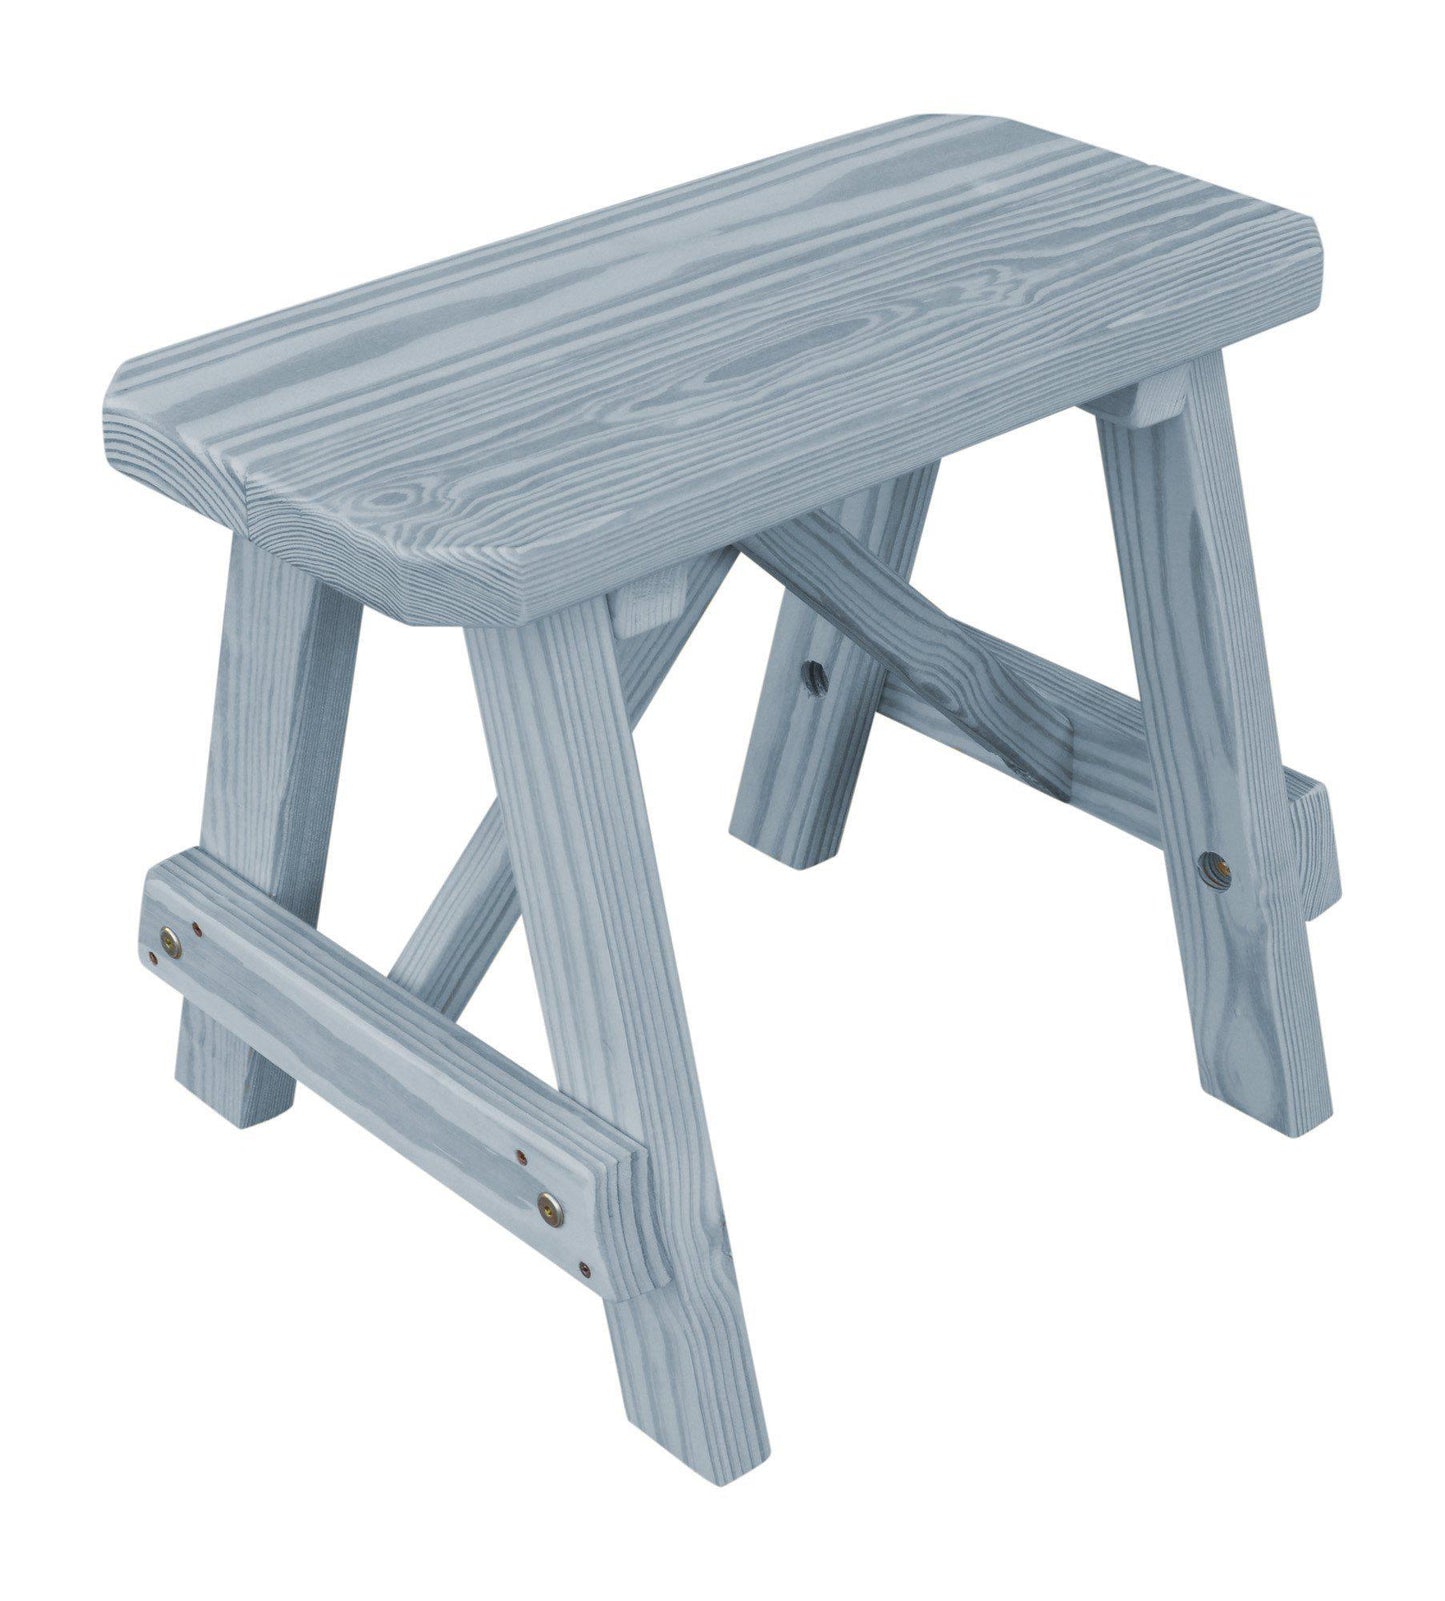 A&L Furniture Co. Yellow Pine 23" Traditional Bench Only - LEAD TIME TO SHIP 10 BUSINESS DAYS